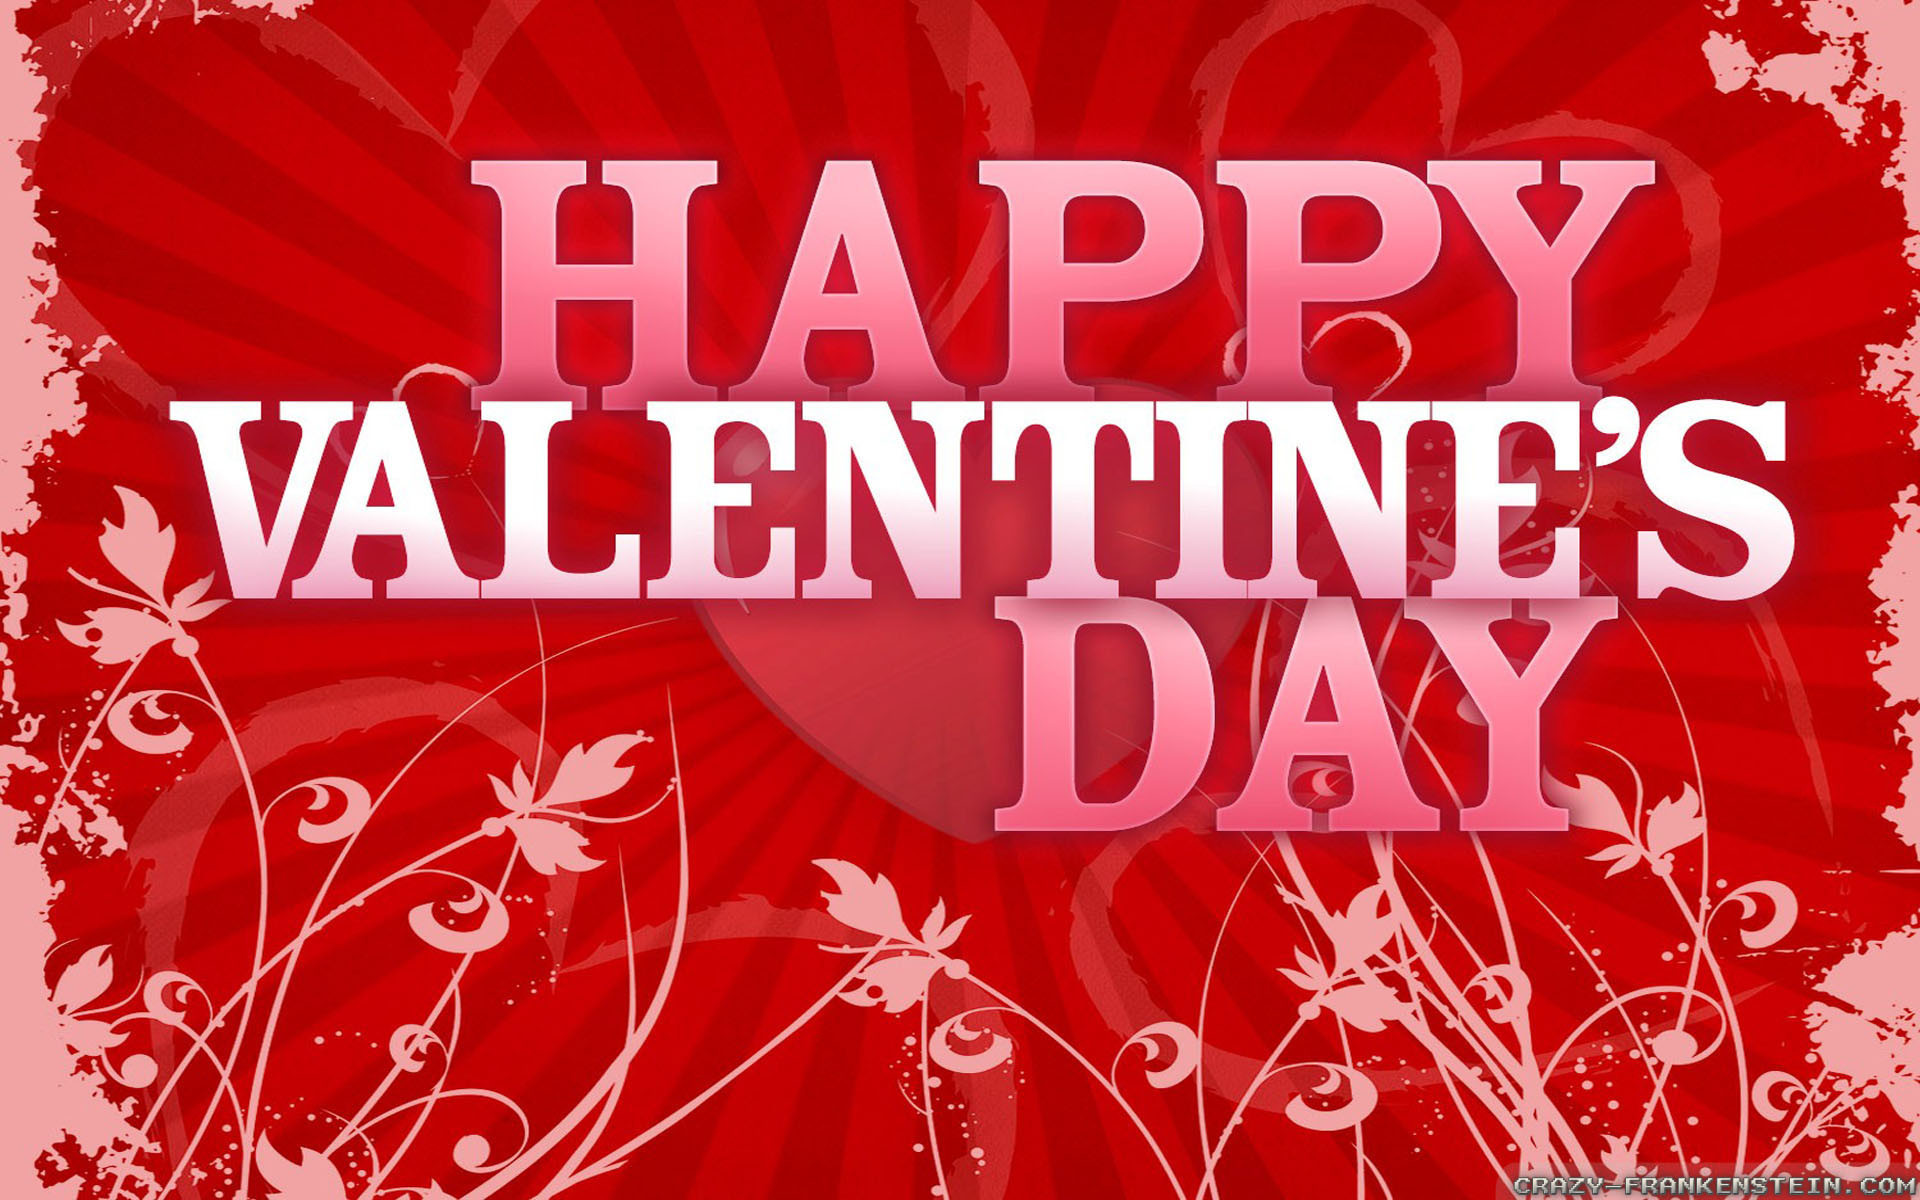 1920x1200 Wallpaper: Happy Valentines Day 3. Resolution: 1024x768 | 1280x1024 |  1600x1200. Widescreen Res: 1440x900 | 1680x1050 | 